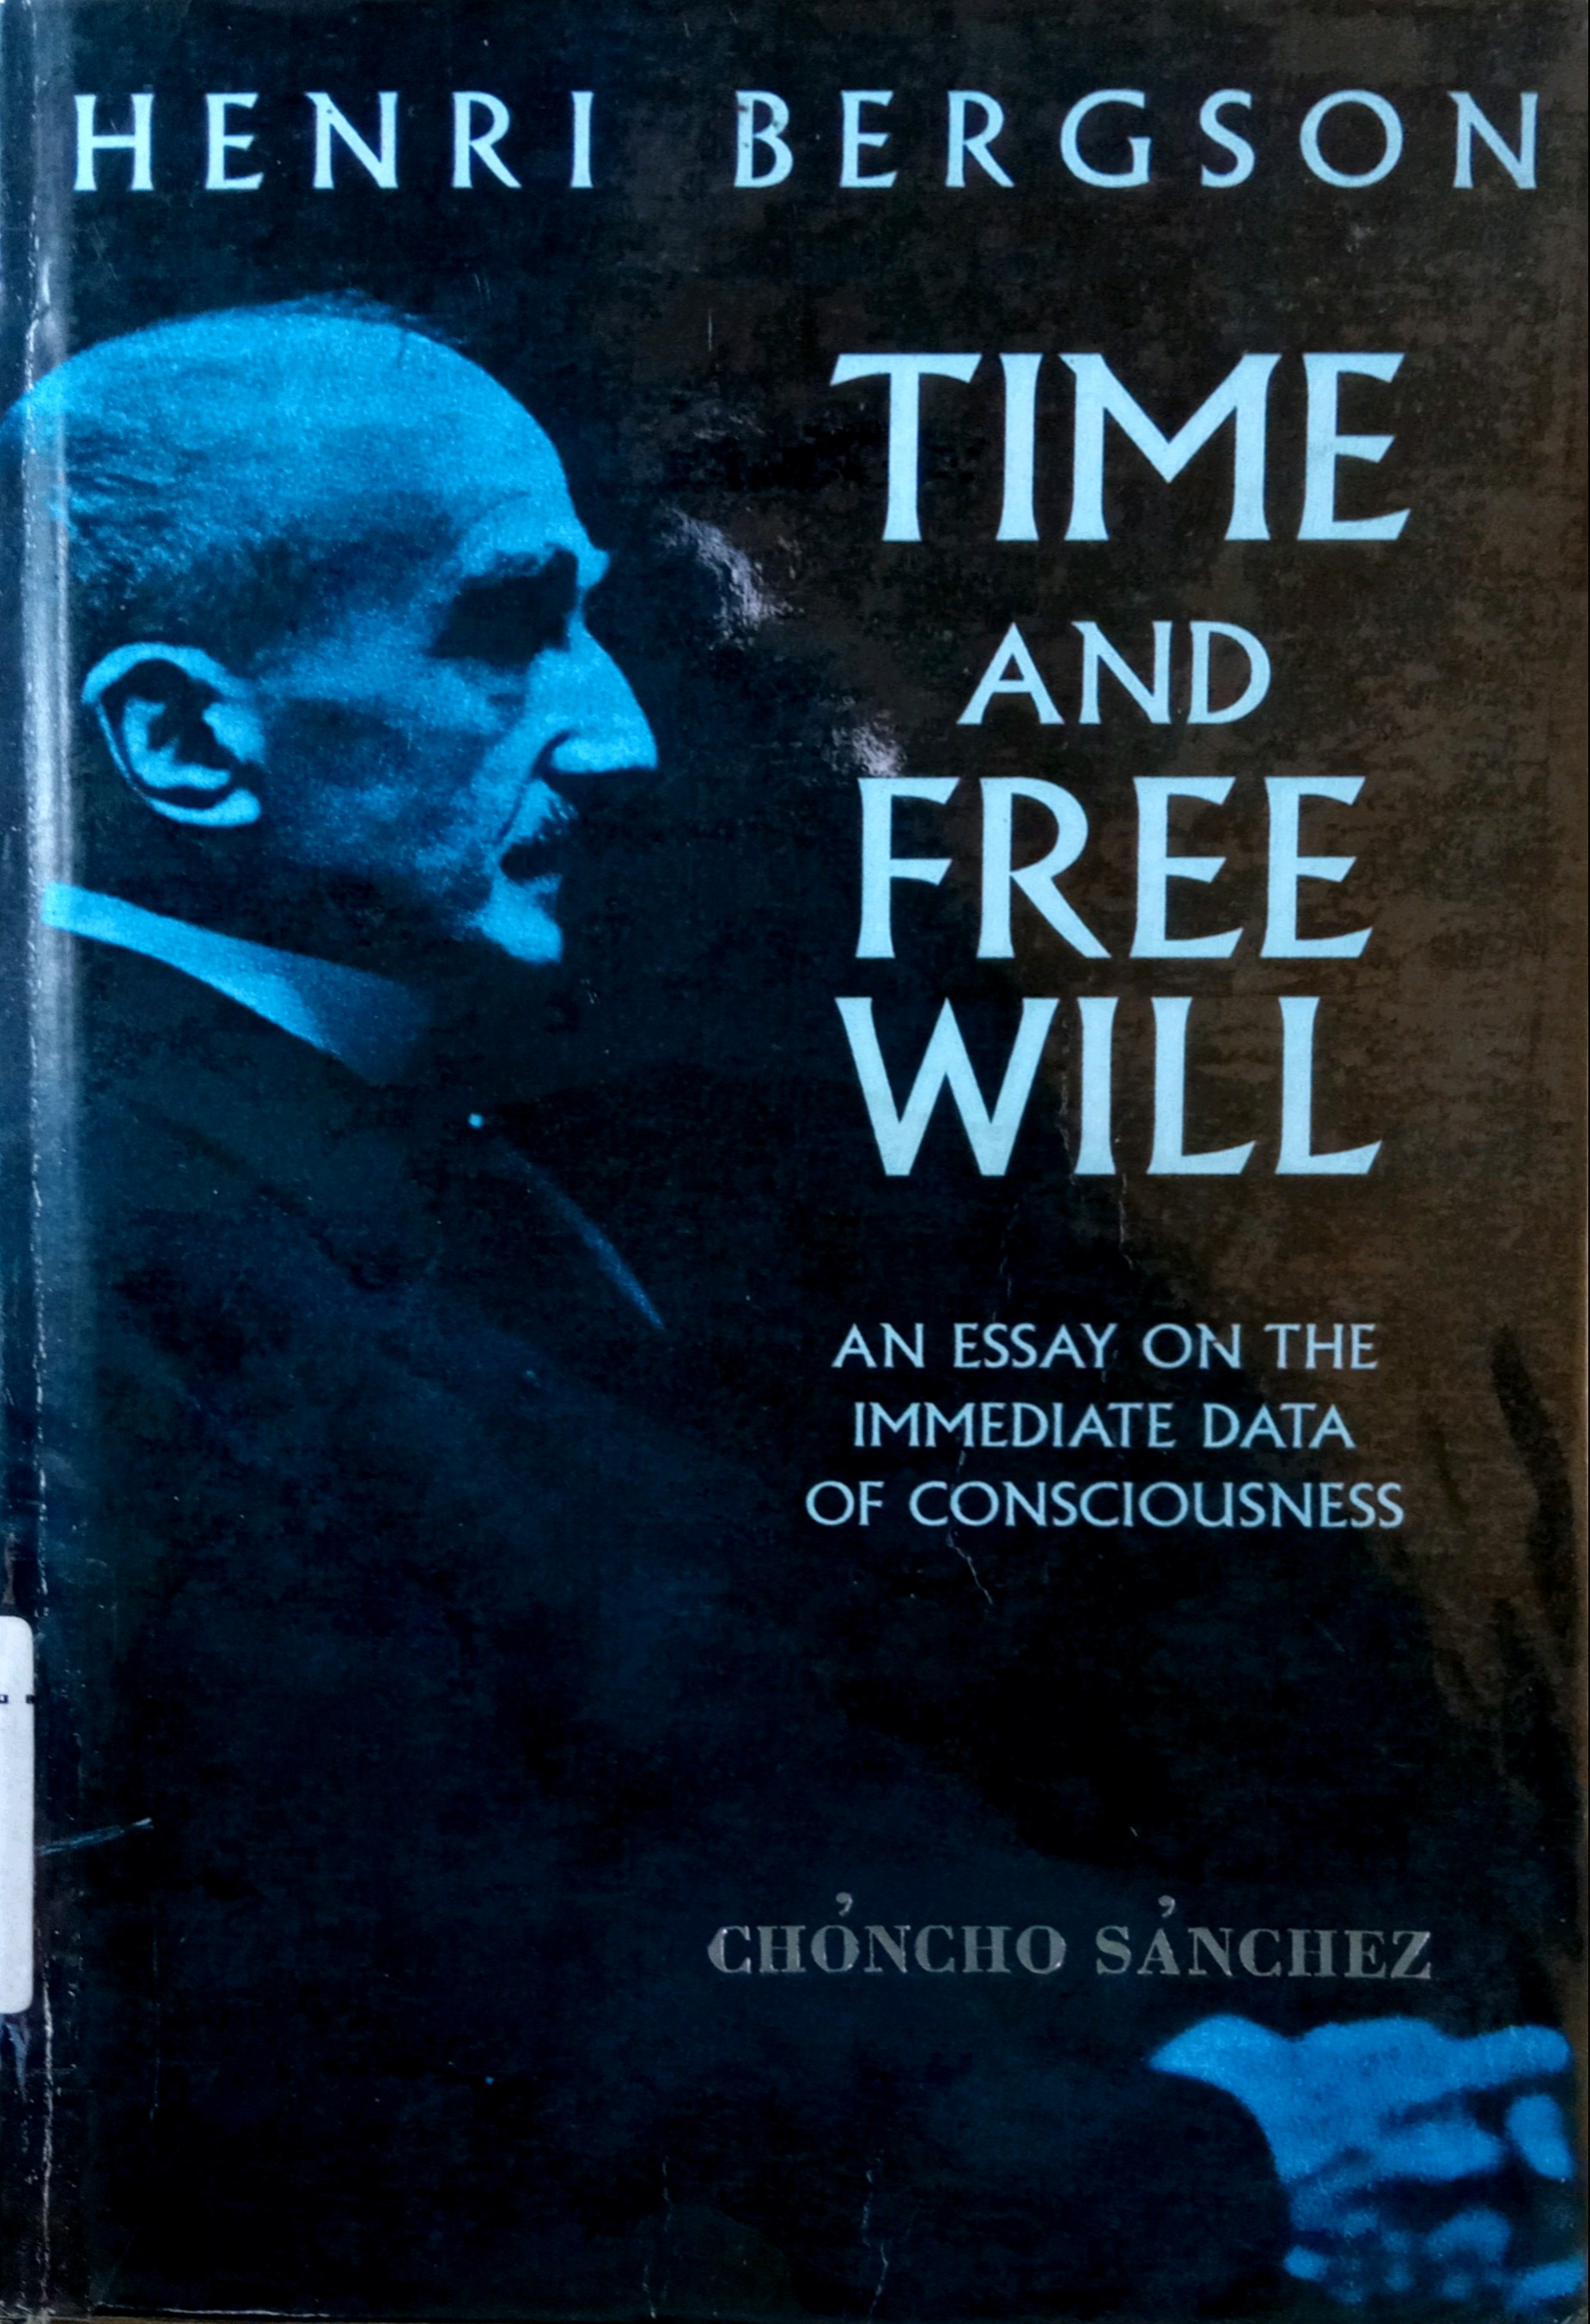 TIME AND FREE WILL